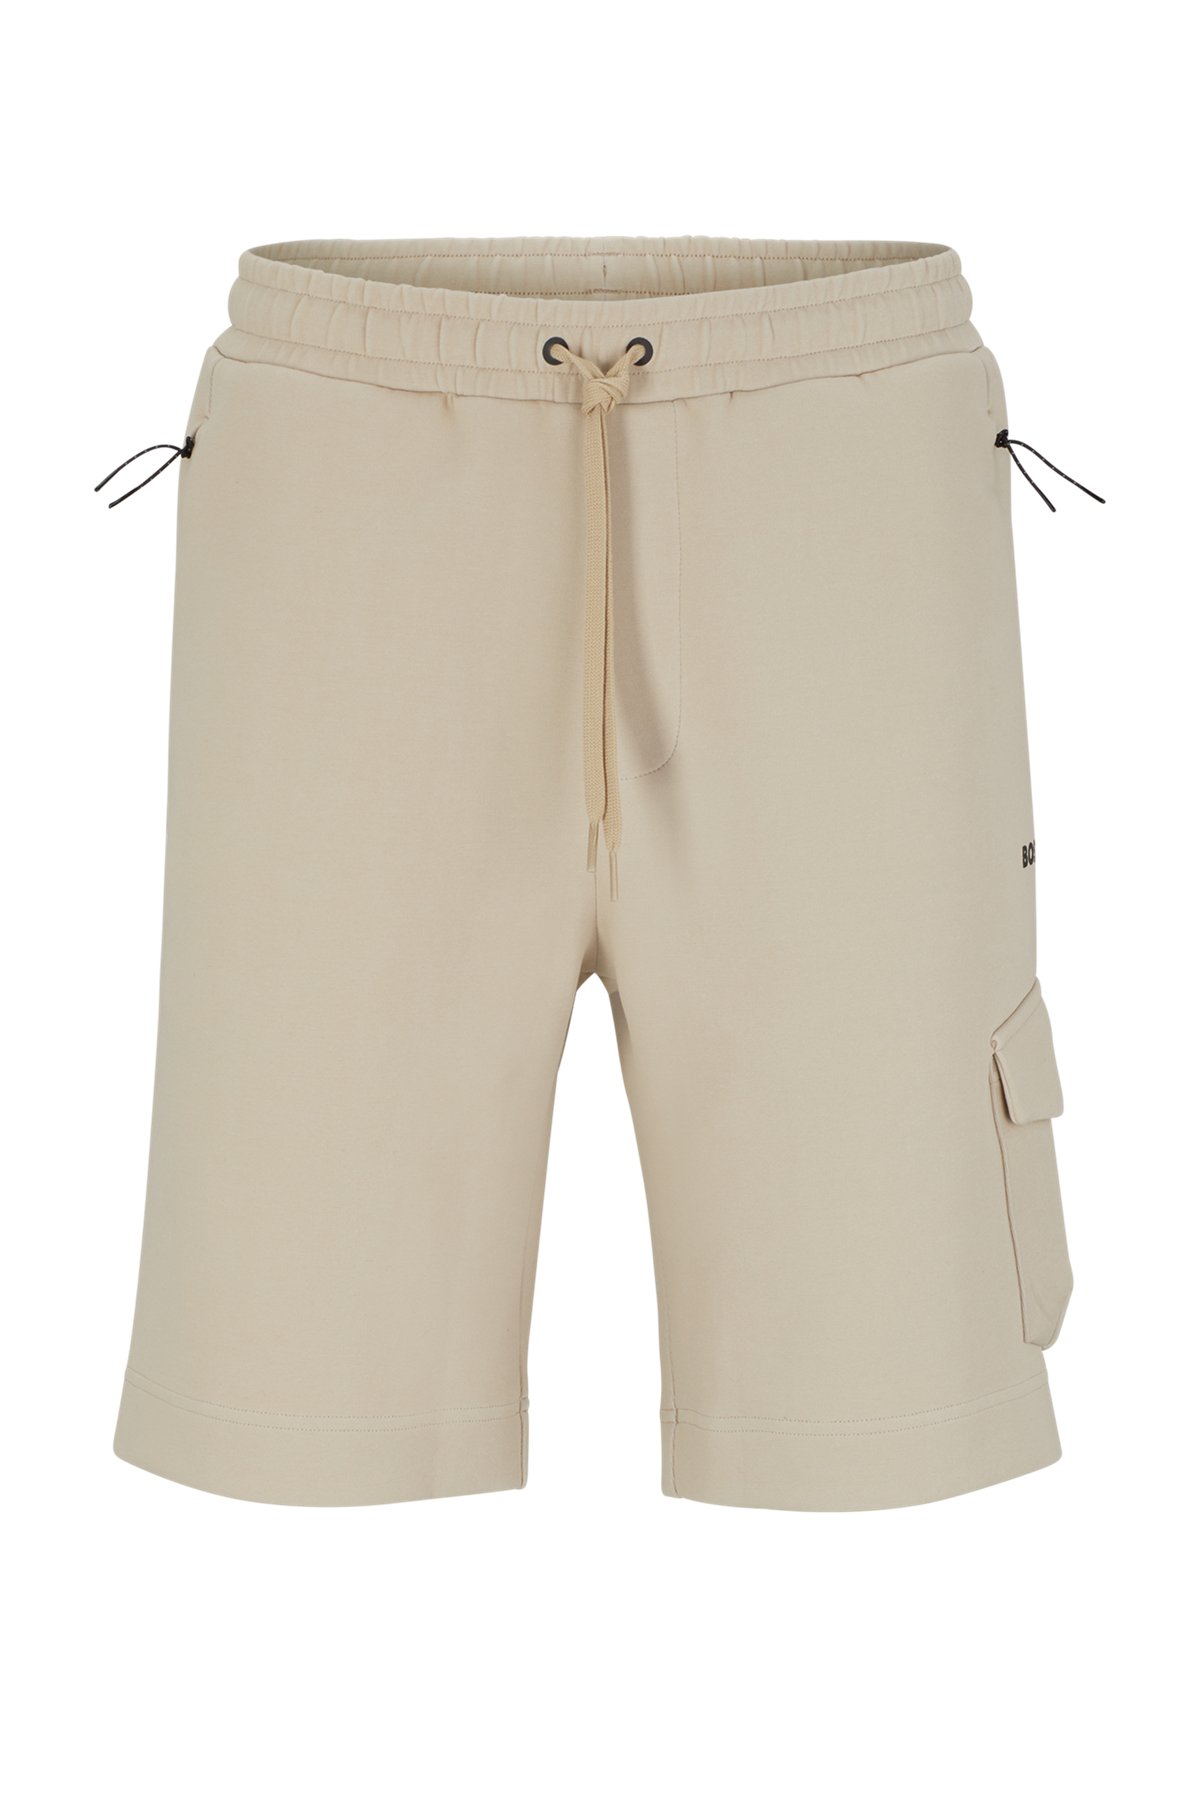 Advanced-stretch cotton-blend shorts with zipped pockets, Beige